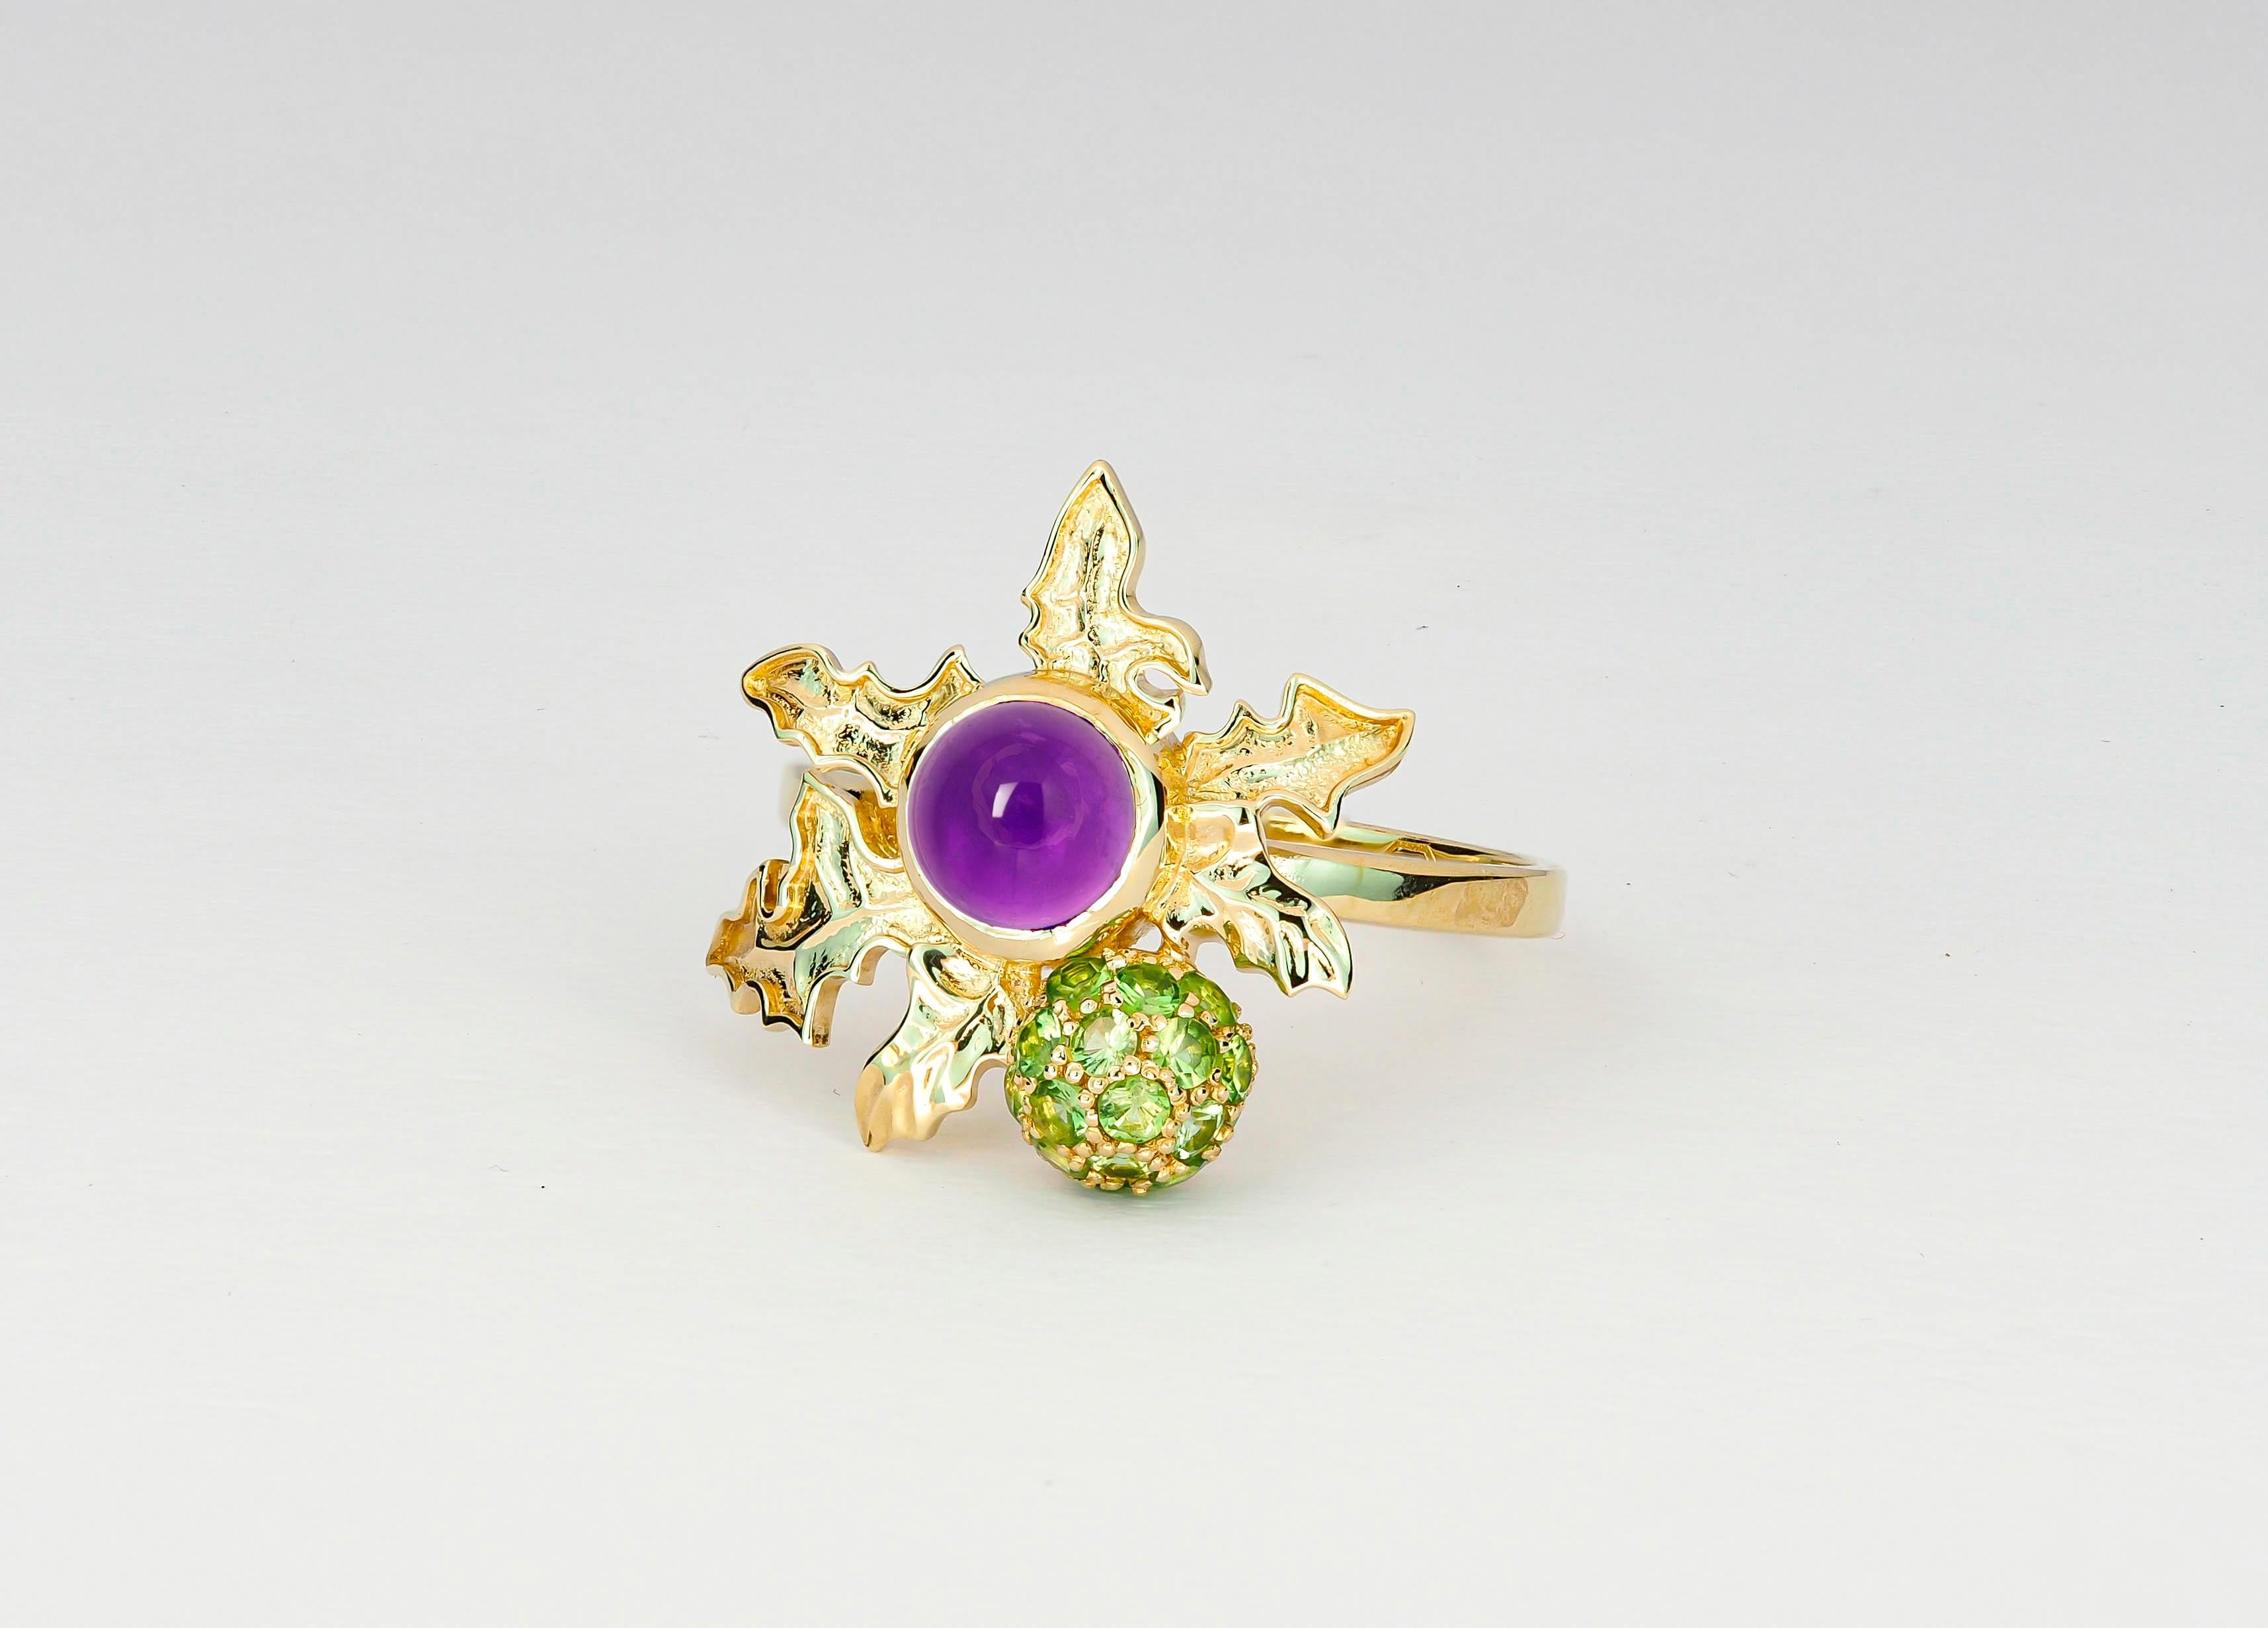 Women's 14 K Gold Scottish Thistle Ring with Amethyst and Peridots